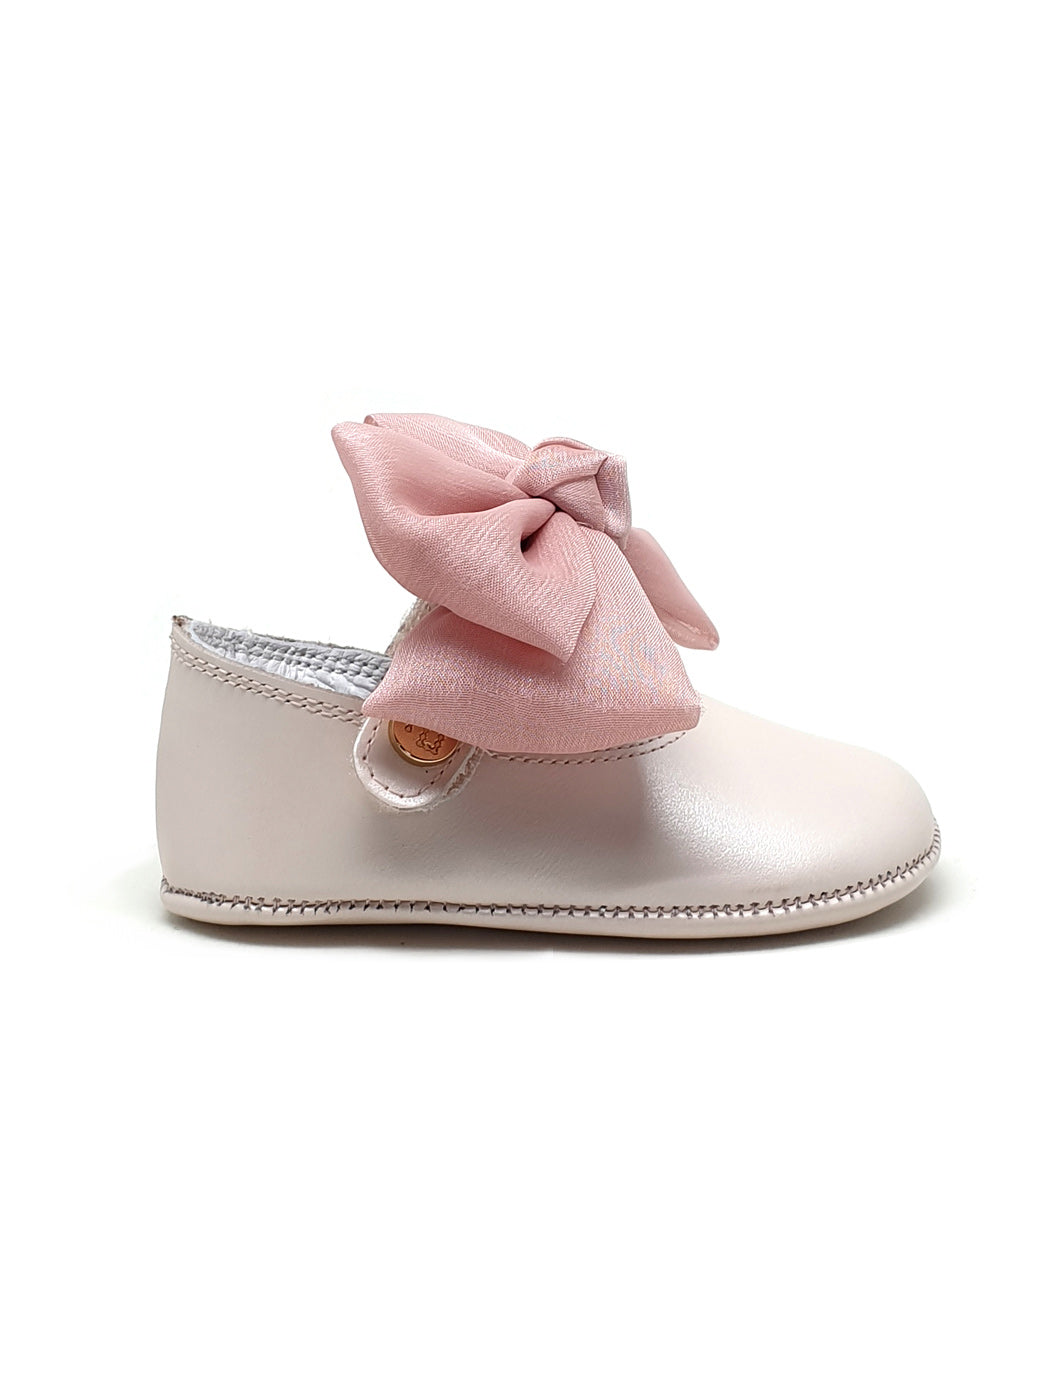 Baby's leather shoes with a bow-201902-5